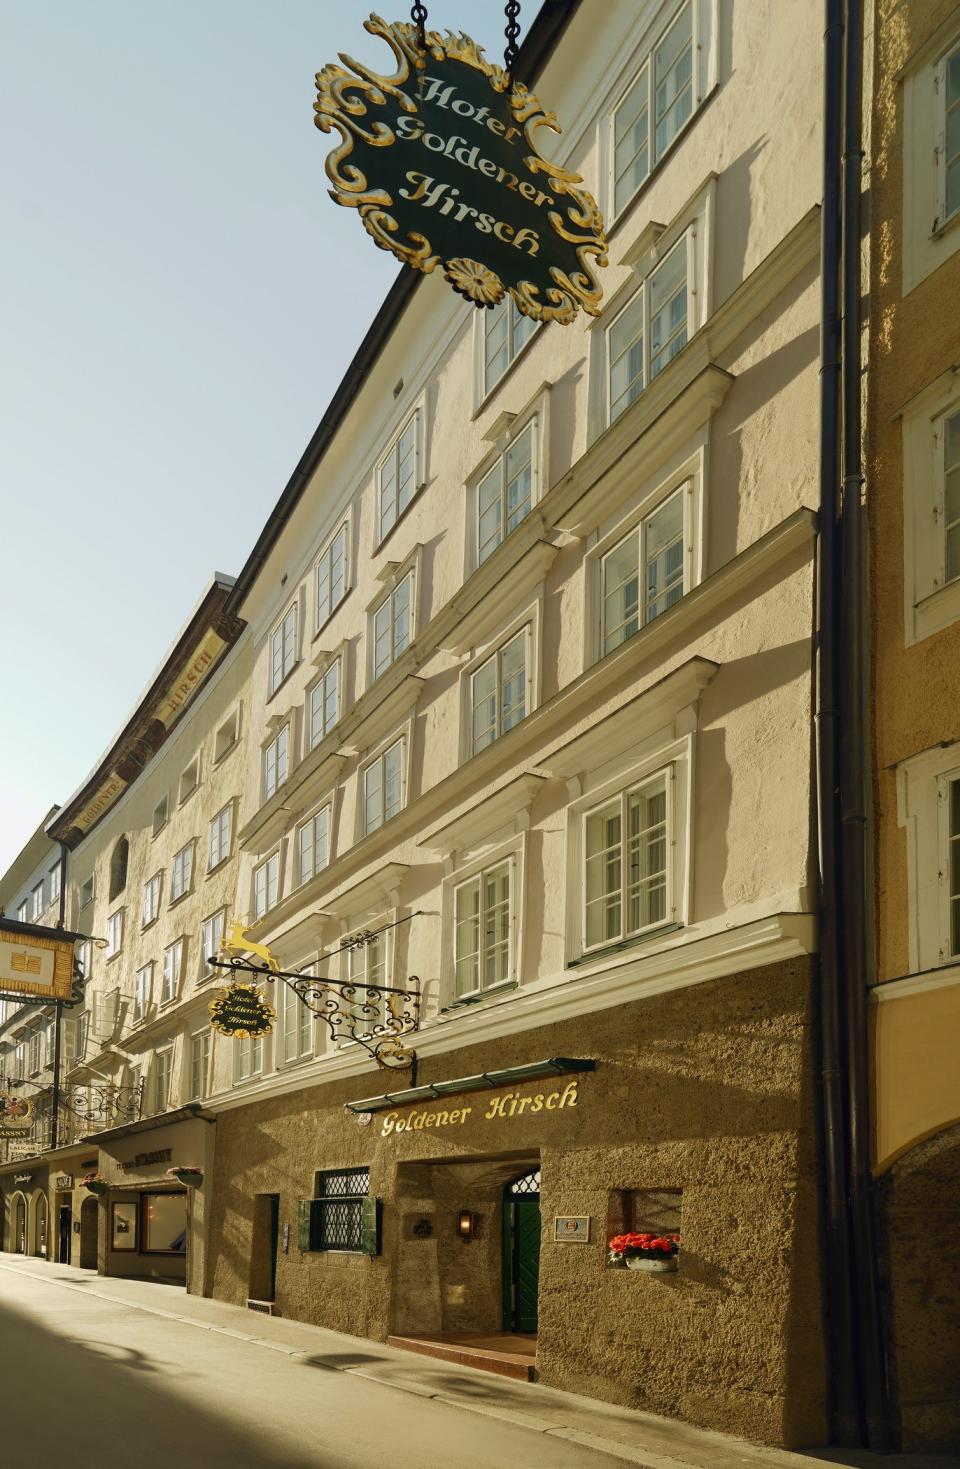 Hotel Goldener Hirsch, a Luxury Collection Hotel, has long been a celebrity favorite.